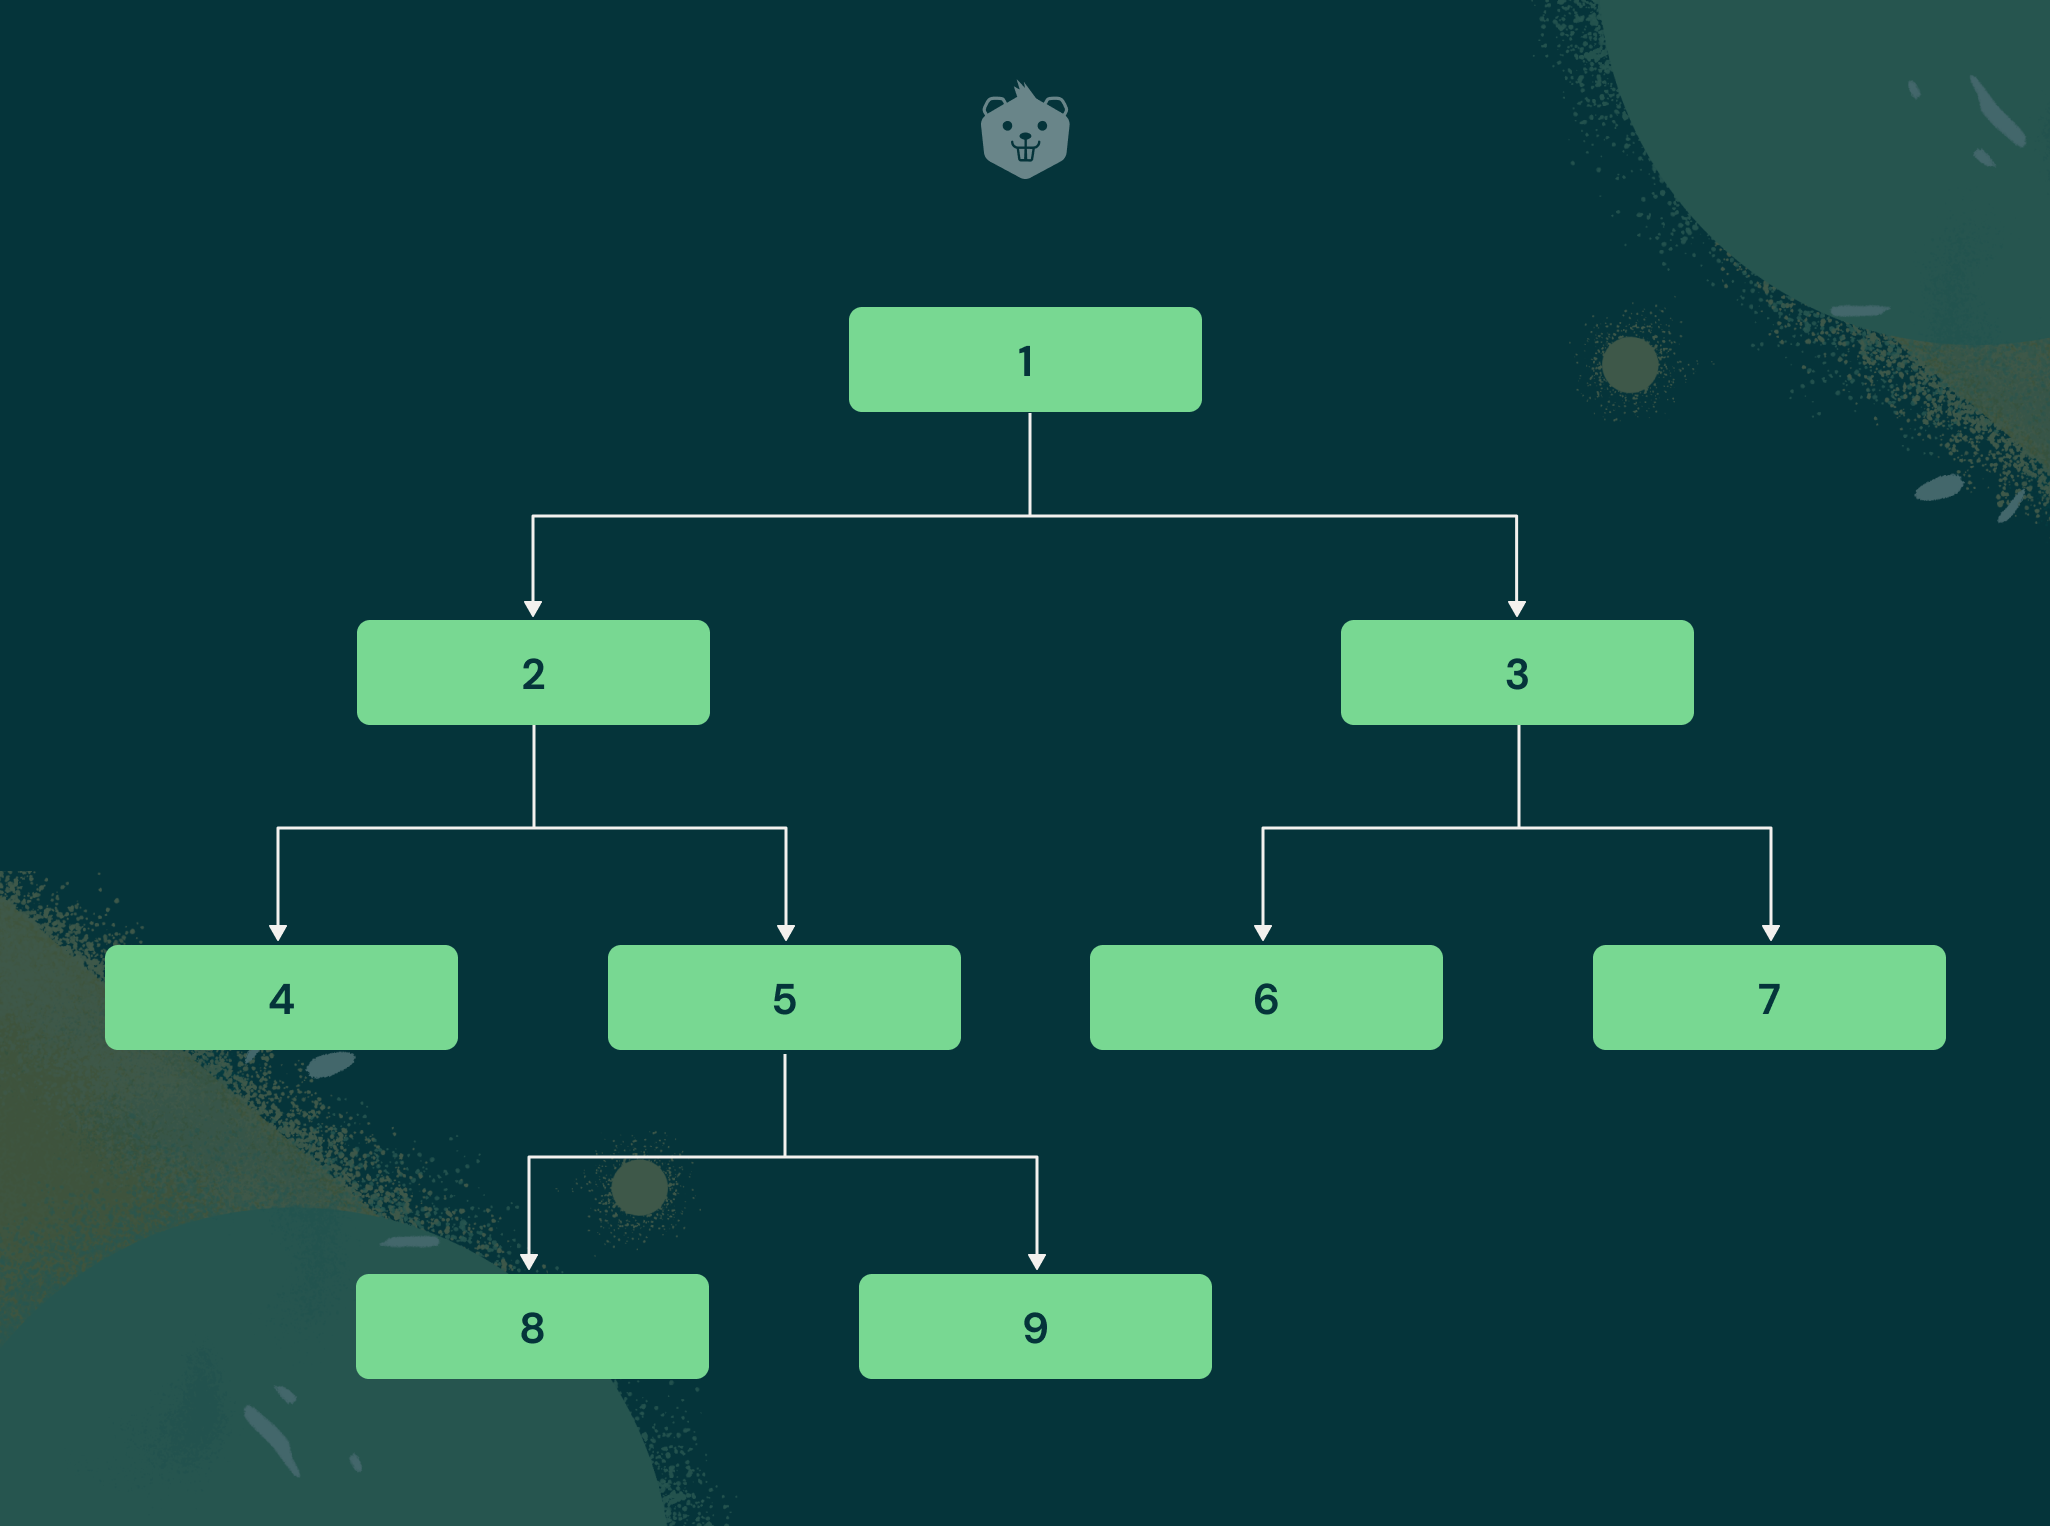 Types of Binary Tree Data Structures - How to Use - Explained With Examples and Activities